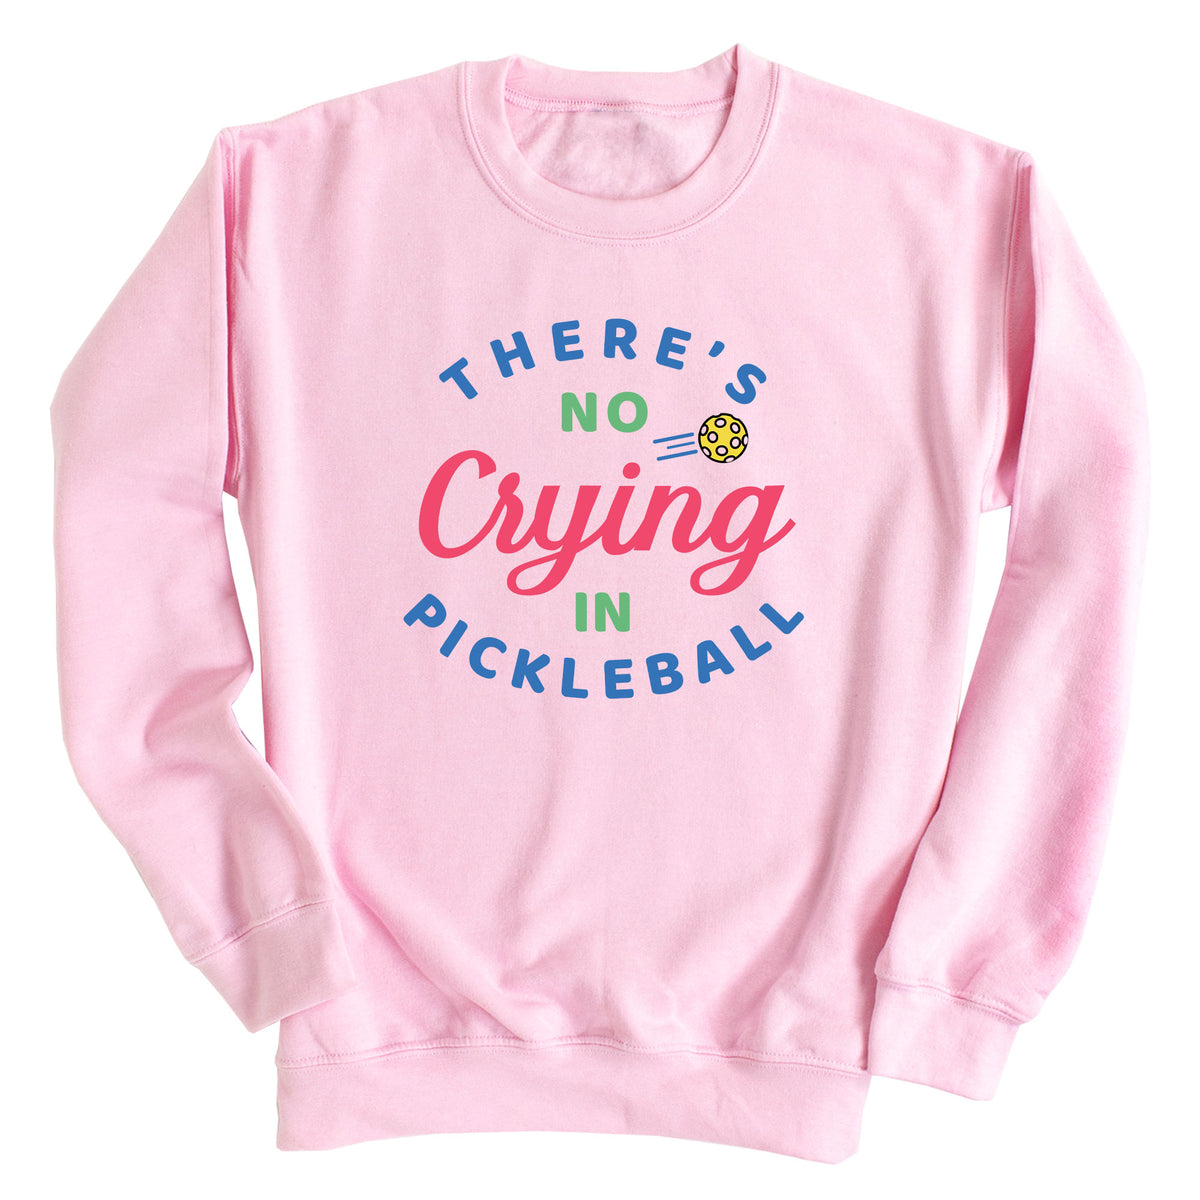 There's Not Crying in Pickleball Sweatshirt